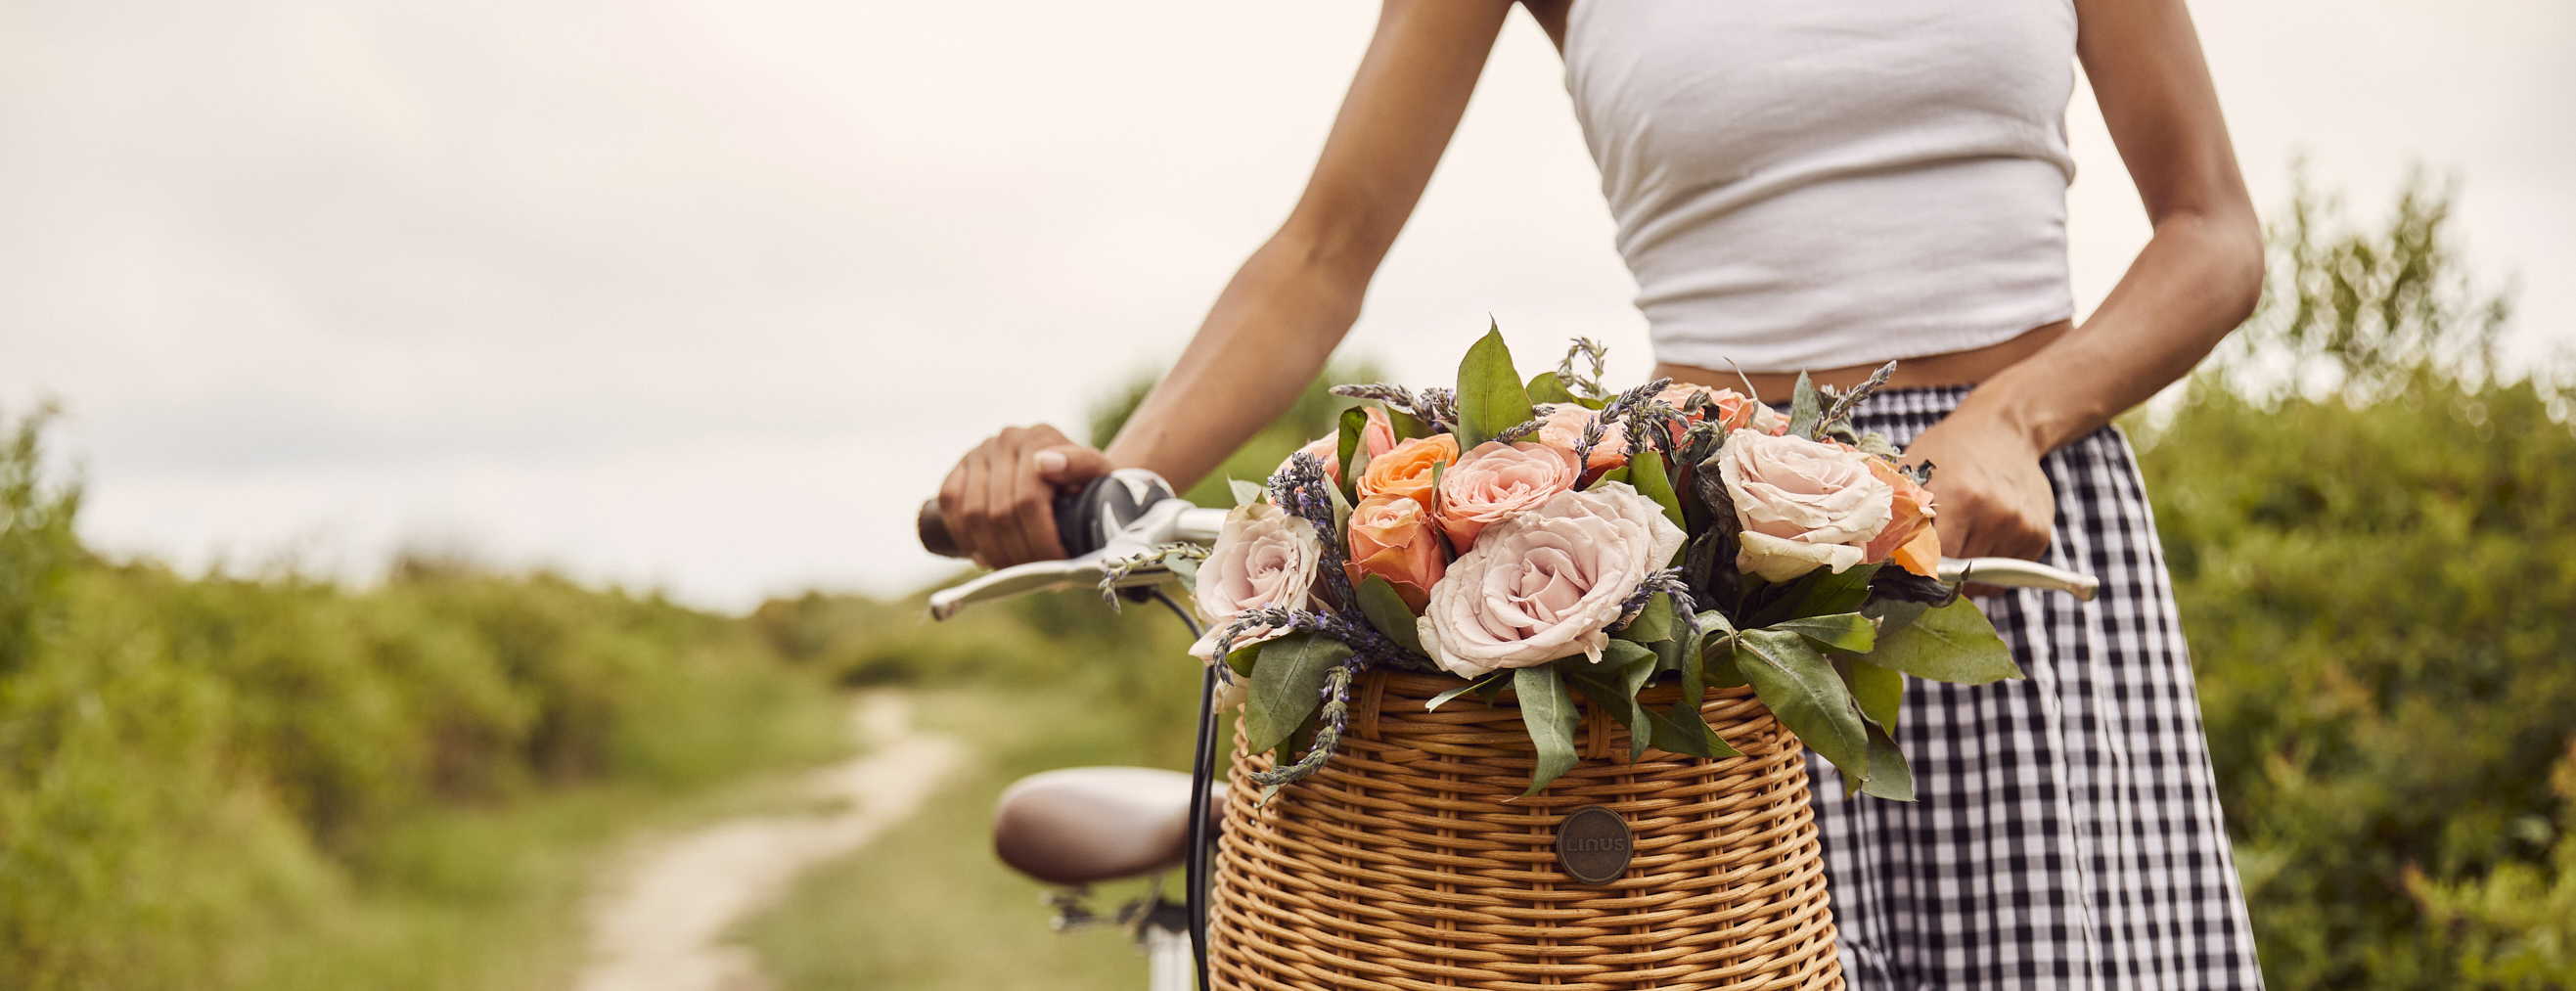 Woman walking a bicycle with a basket full of flowers with a cottagecore aesthetic. 